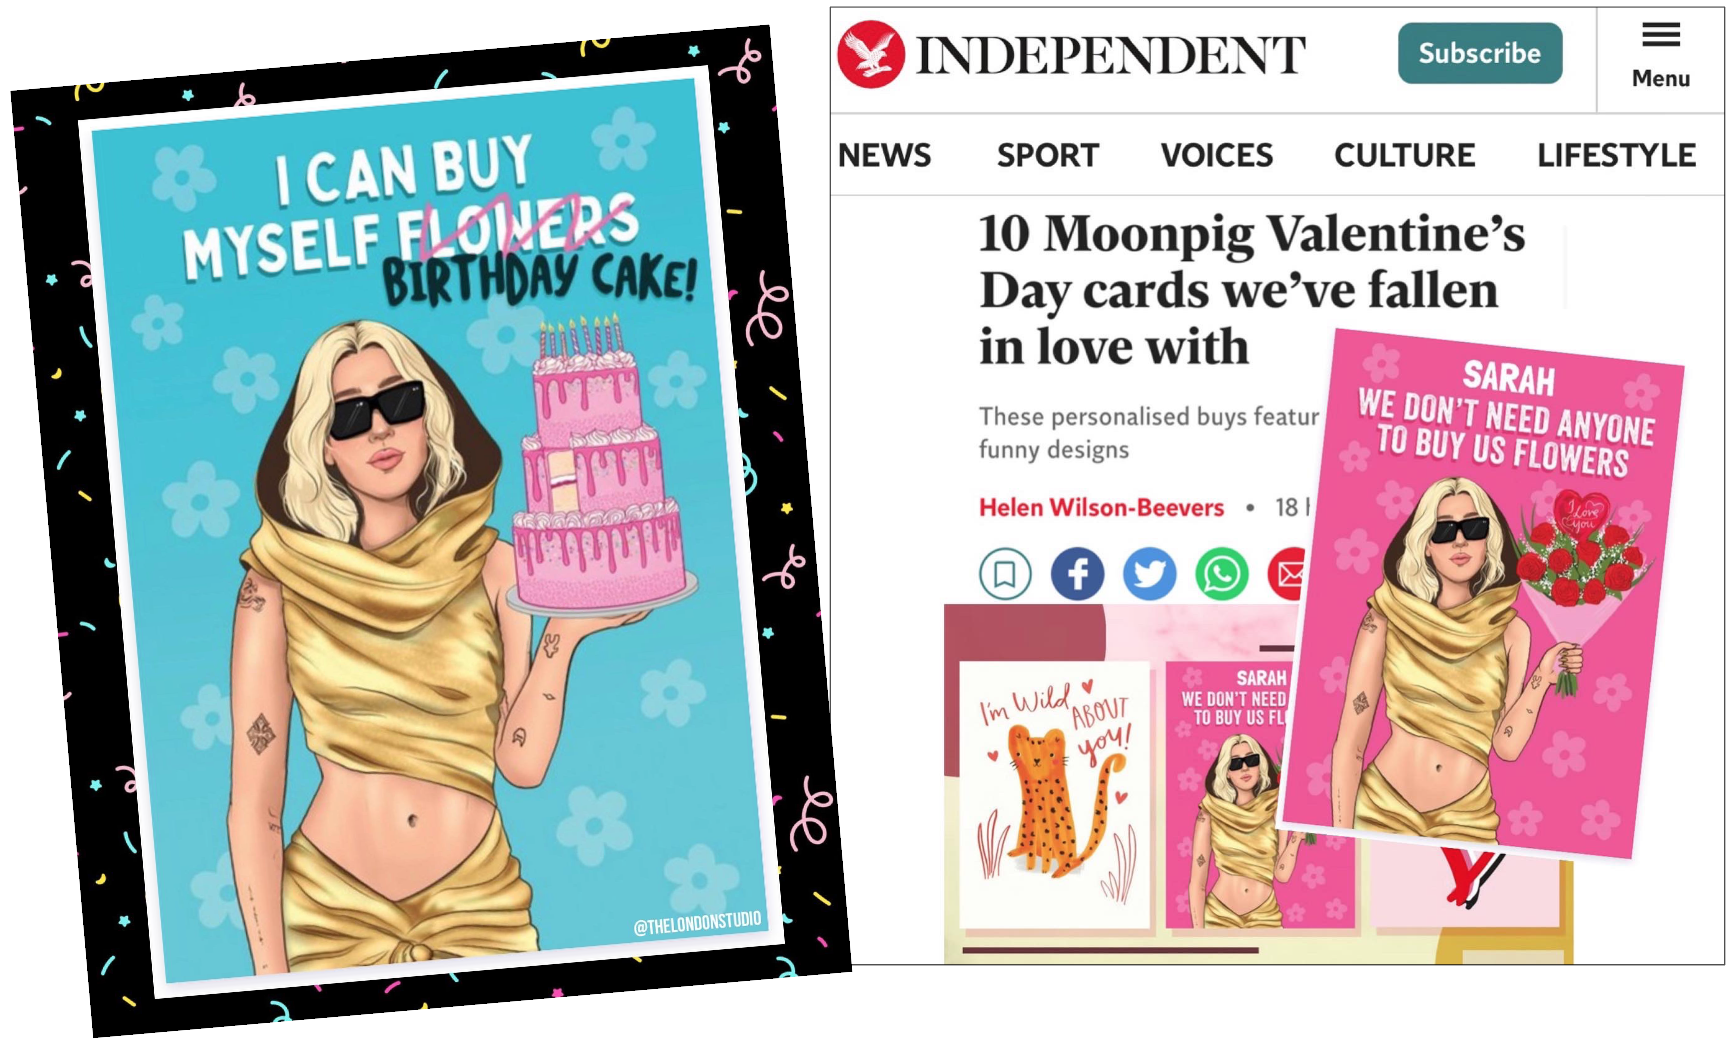 Above: Miley’s empowered break-up song features on Galentine’s Day cards